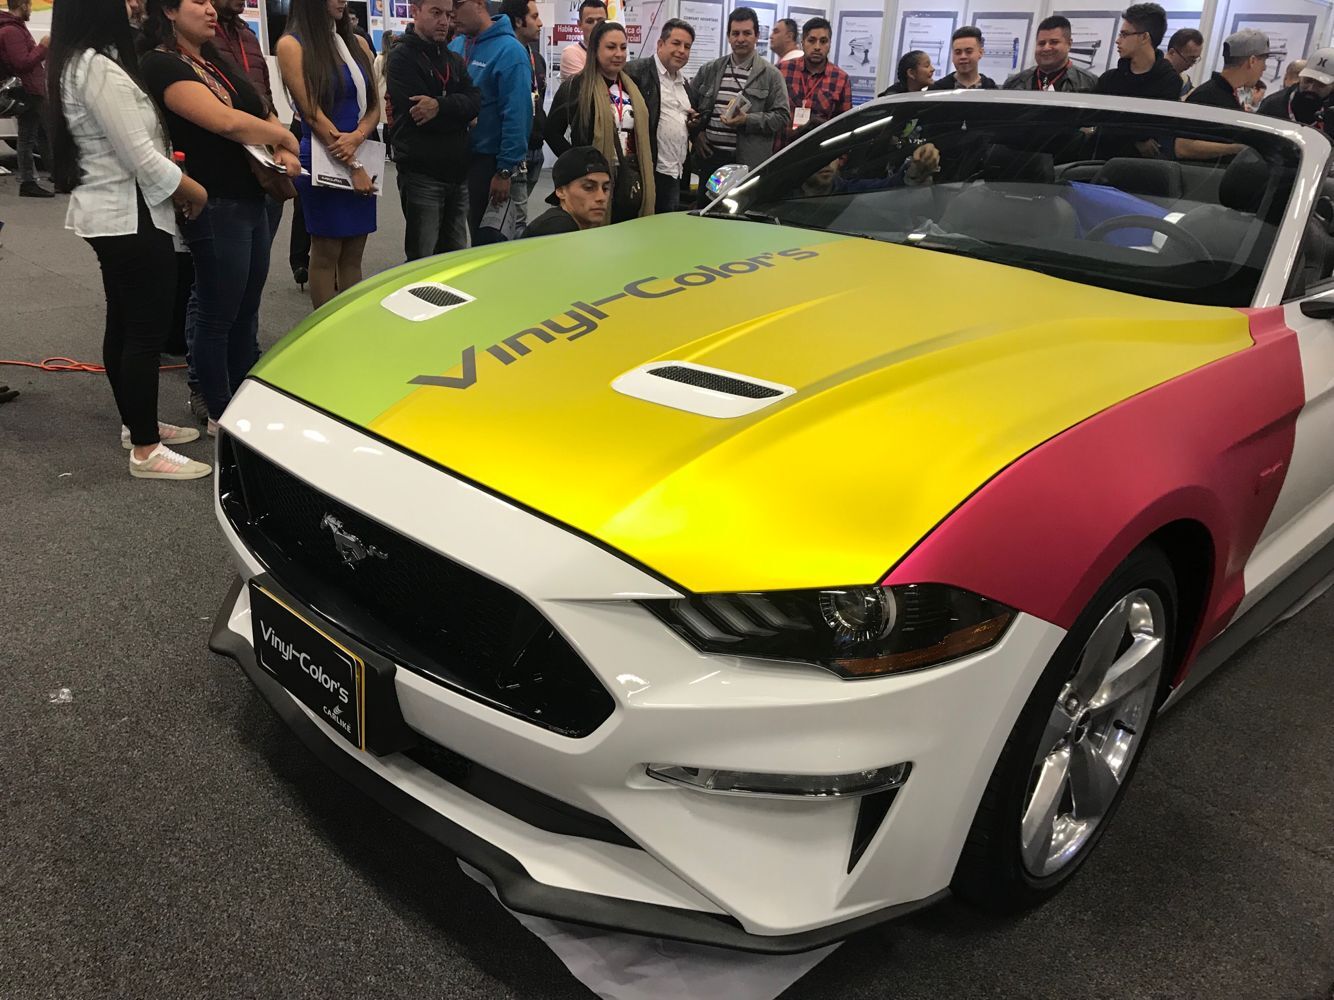 CARLIKE Premium+ Car Wrapping Vinyl joins hands with Vinyl Color's attending Andigráfica 2019 in Bogotá Colombia